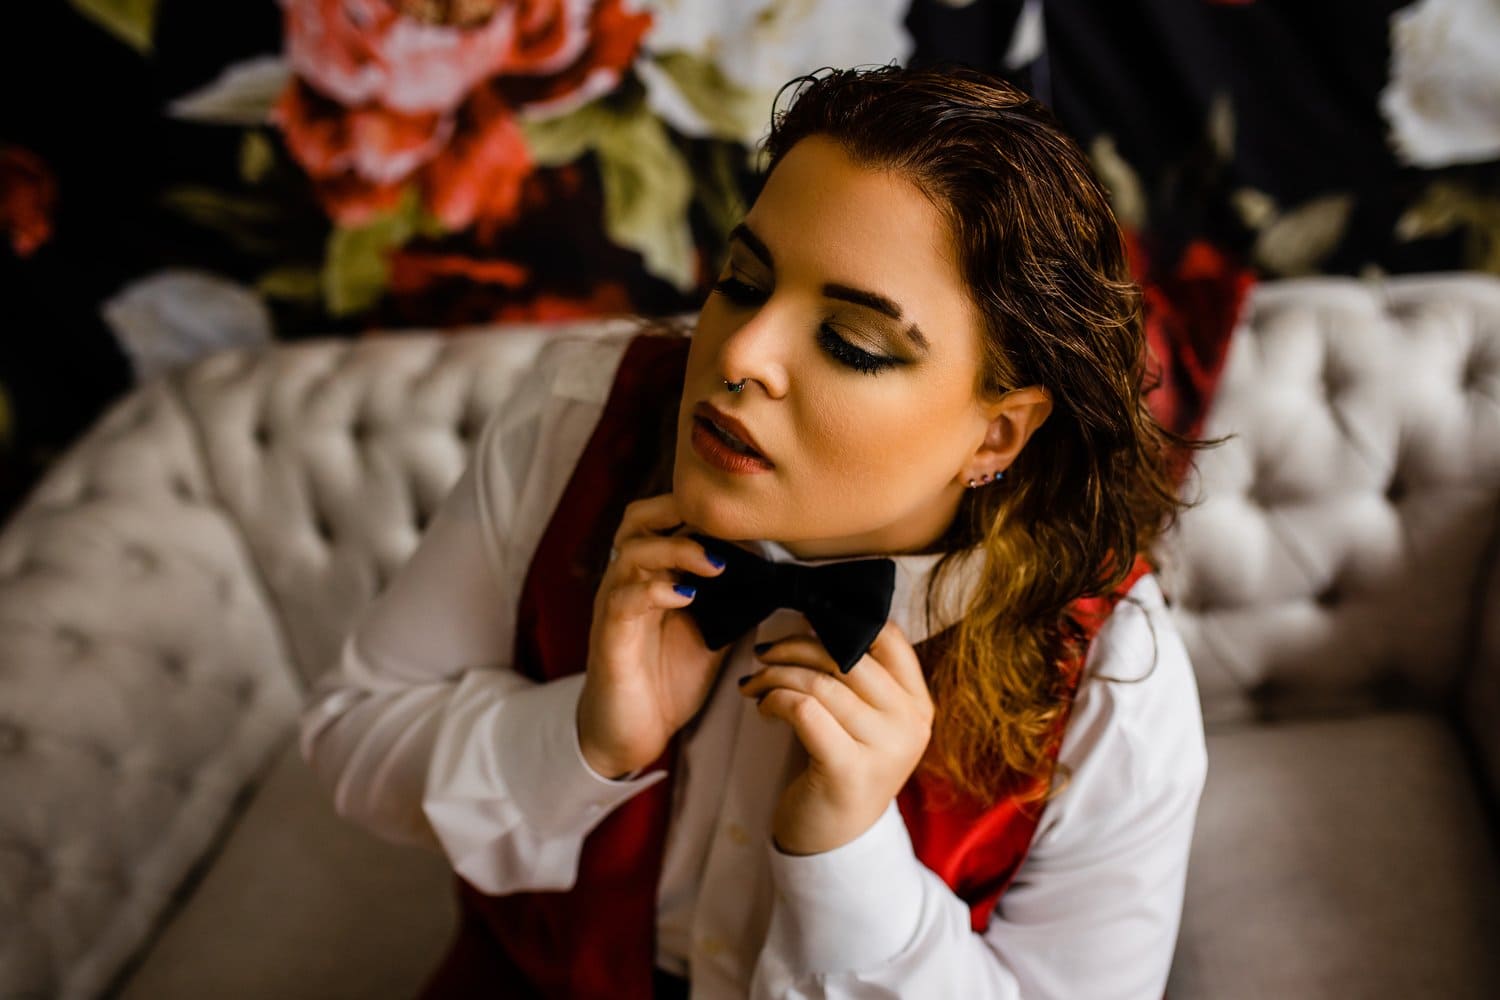 A woman adjusting her bow tie on a couch for a photoshoot.